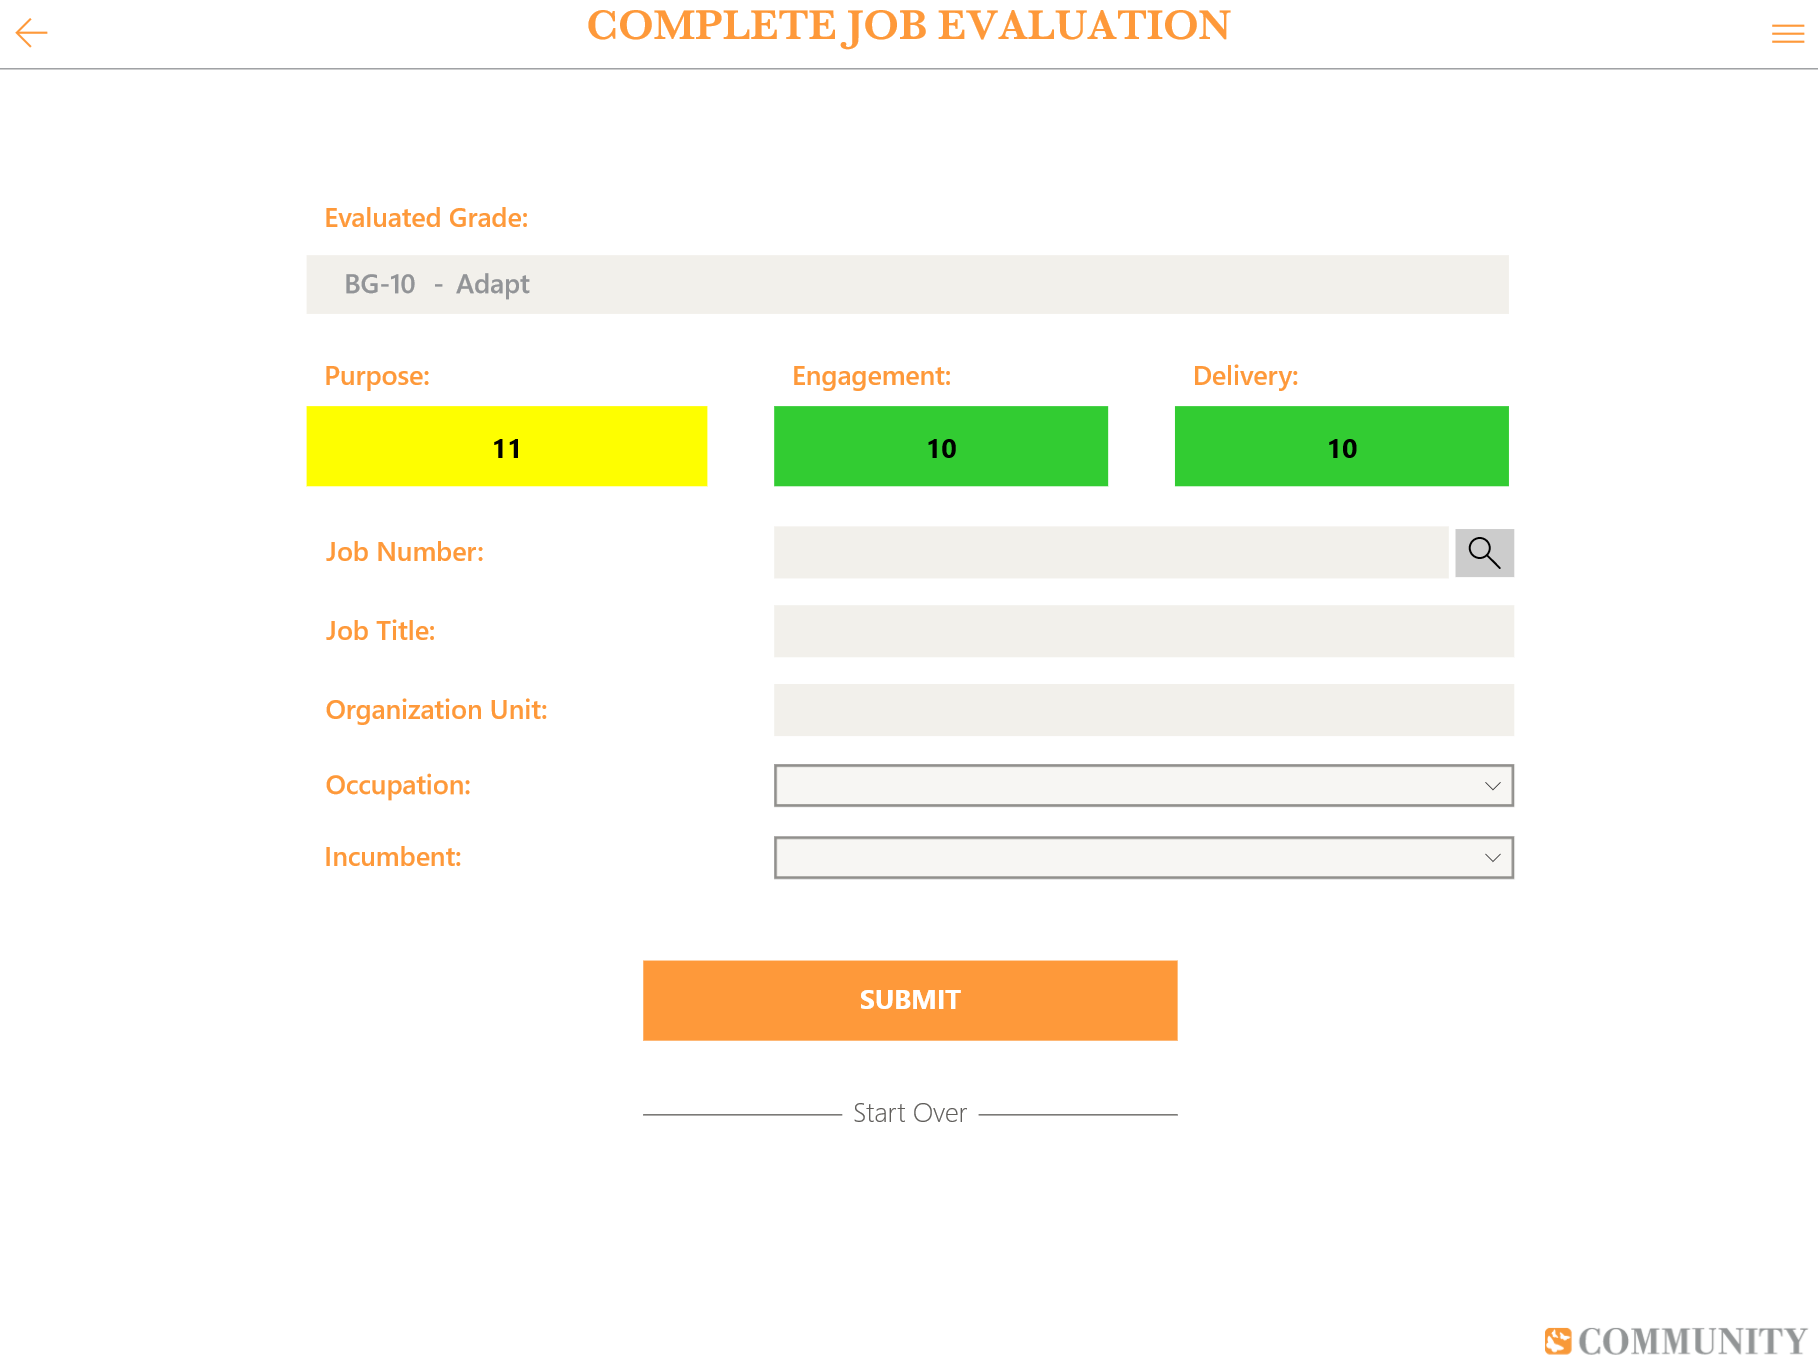 Each completed evaluation can be assigned to a particular job #, job title, org unit etc.